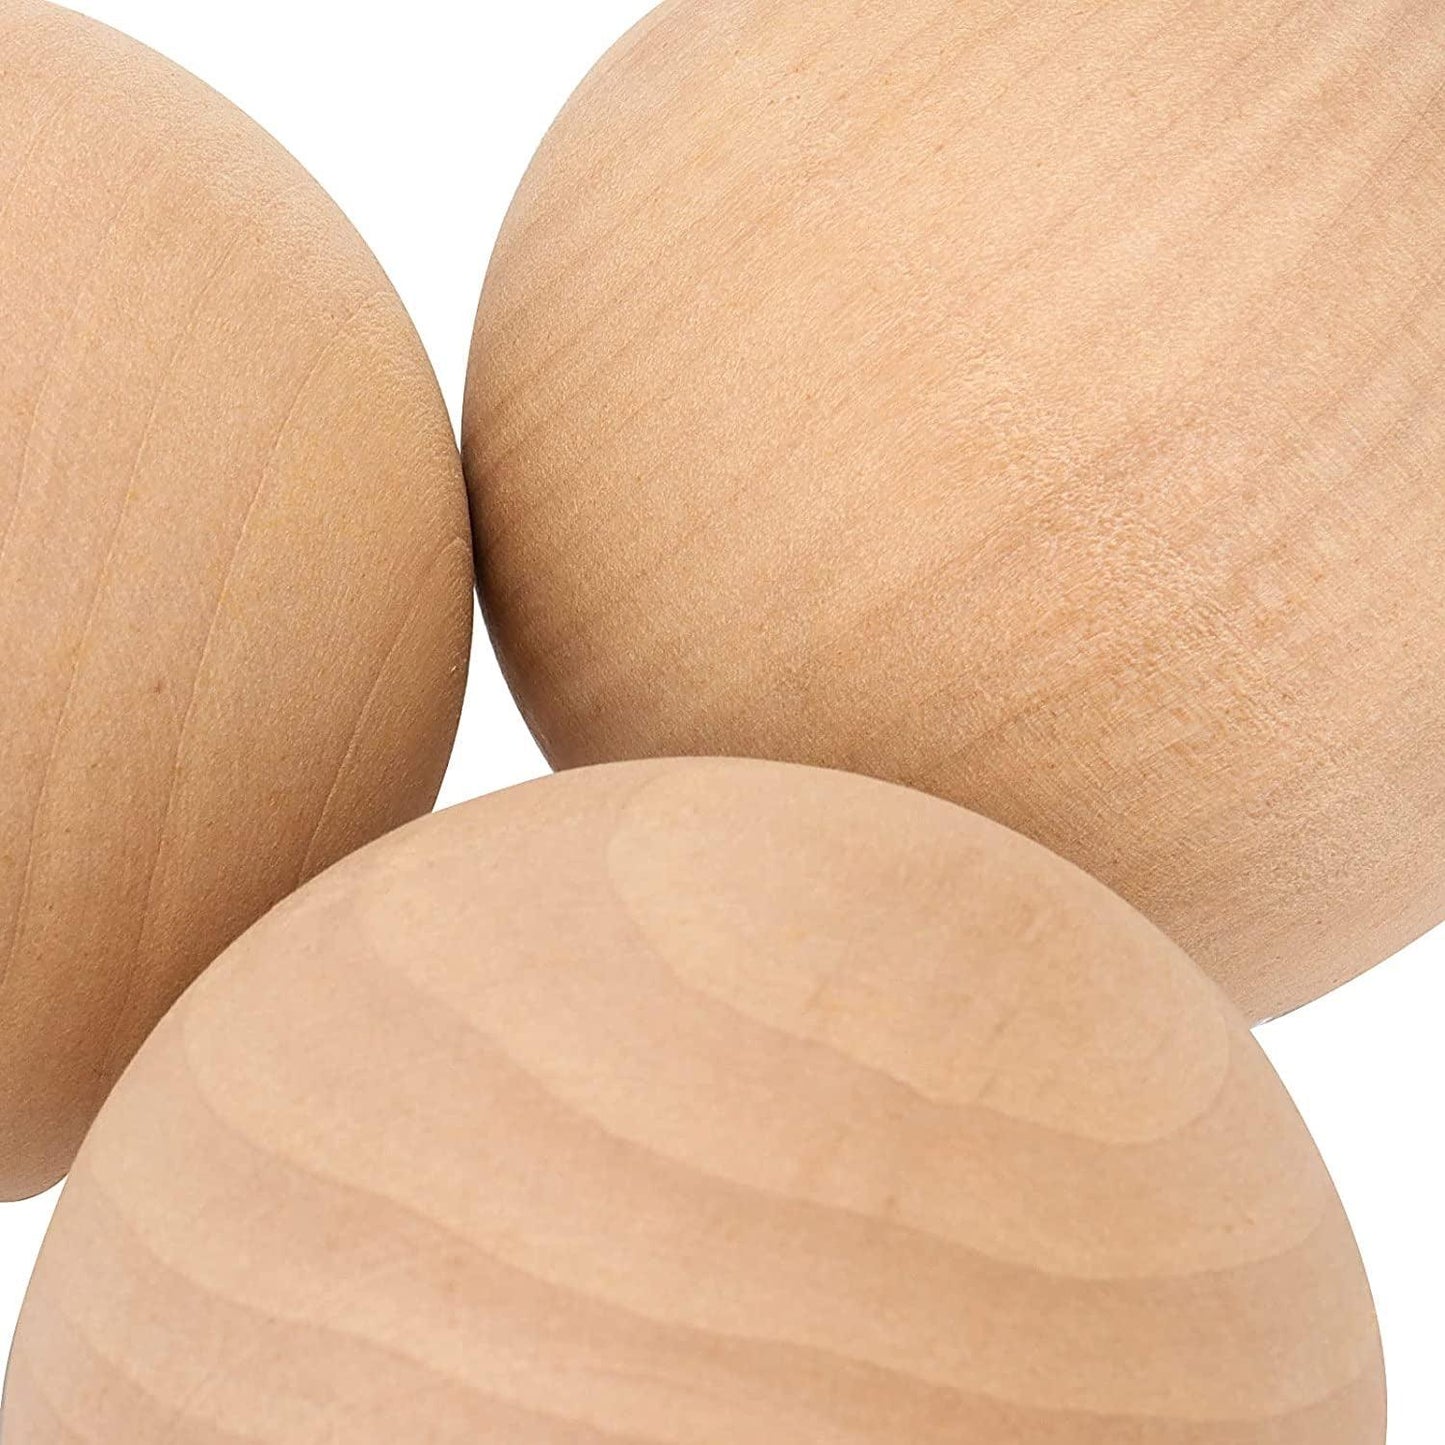 4 Pieces 3 Inch Wooden round Ball, Unfinished Natural DIY Decorative Crafting Hardwood Balls - WoodArtSupply